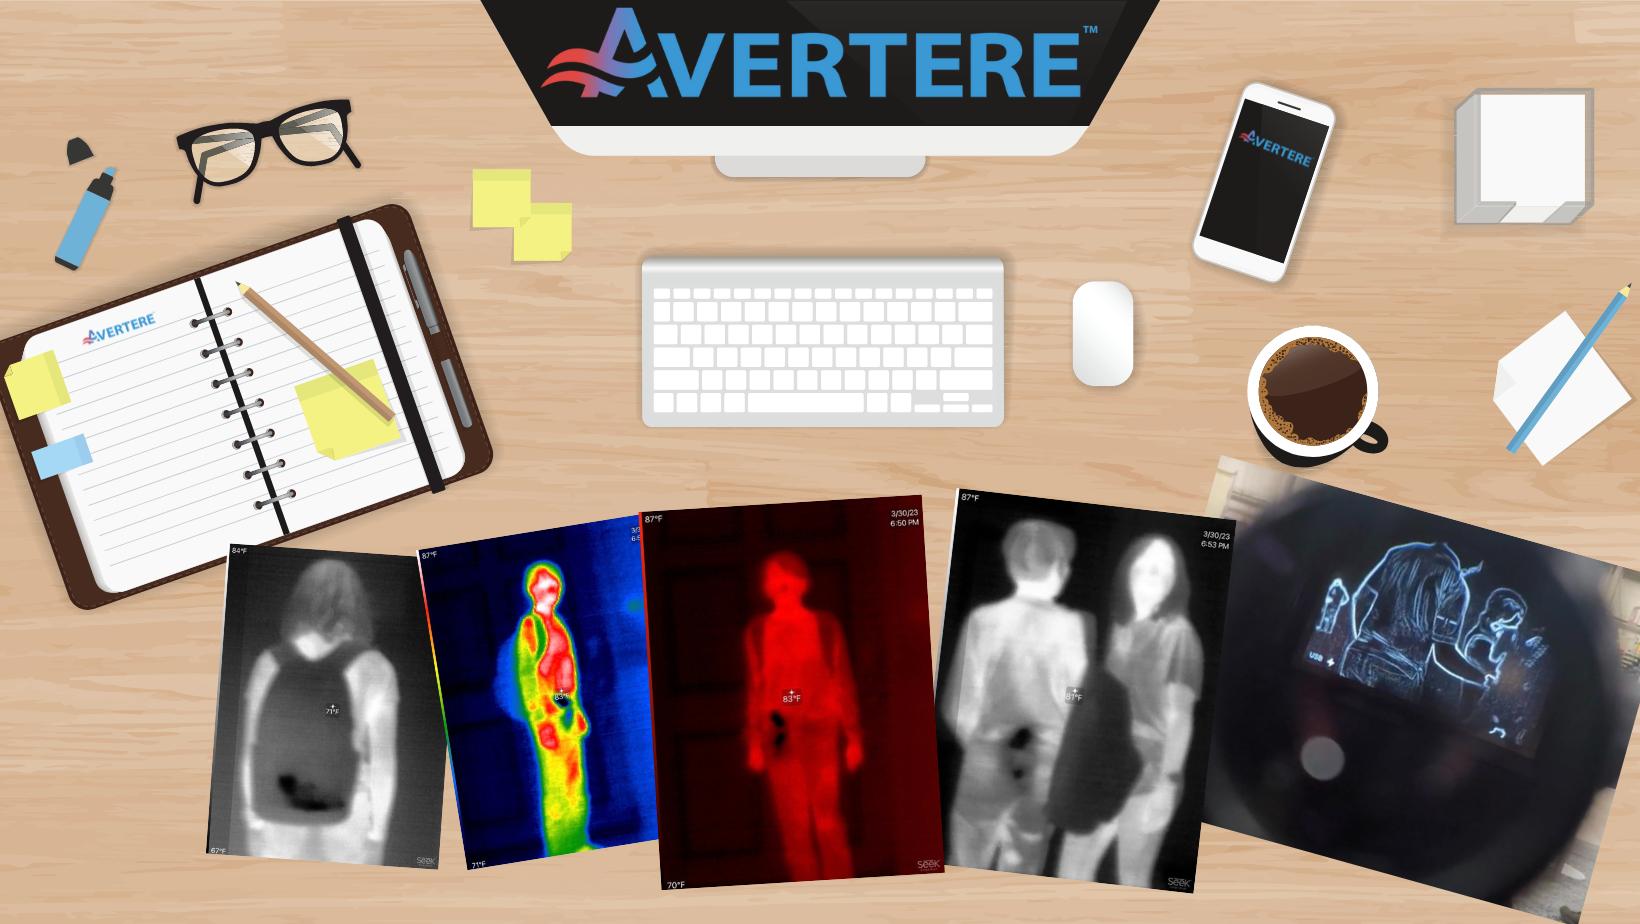 Avertere's technology-agnostic approach delivers efficient and effective school safety solutions nationwide.